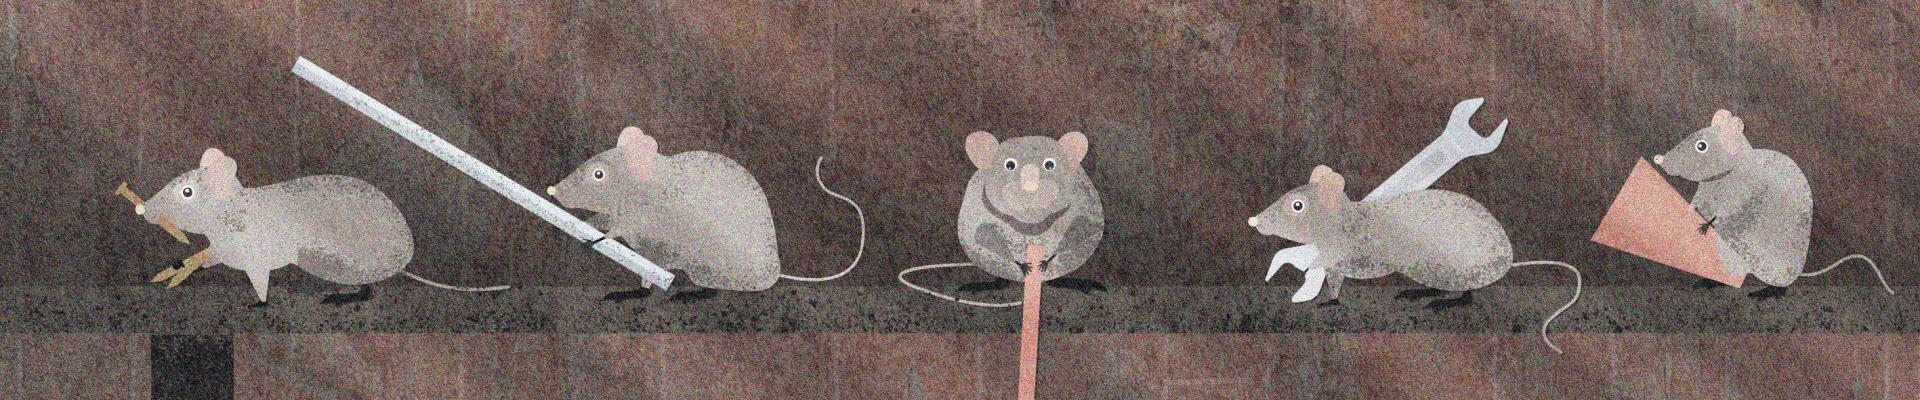 Illustration of a mice in a shed tidying and assorting tools.